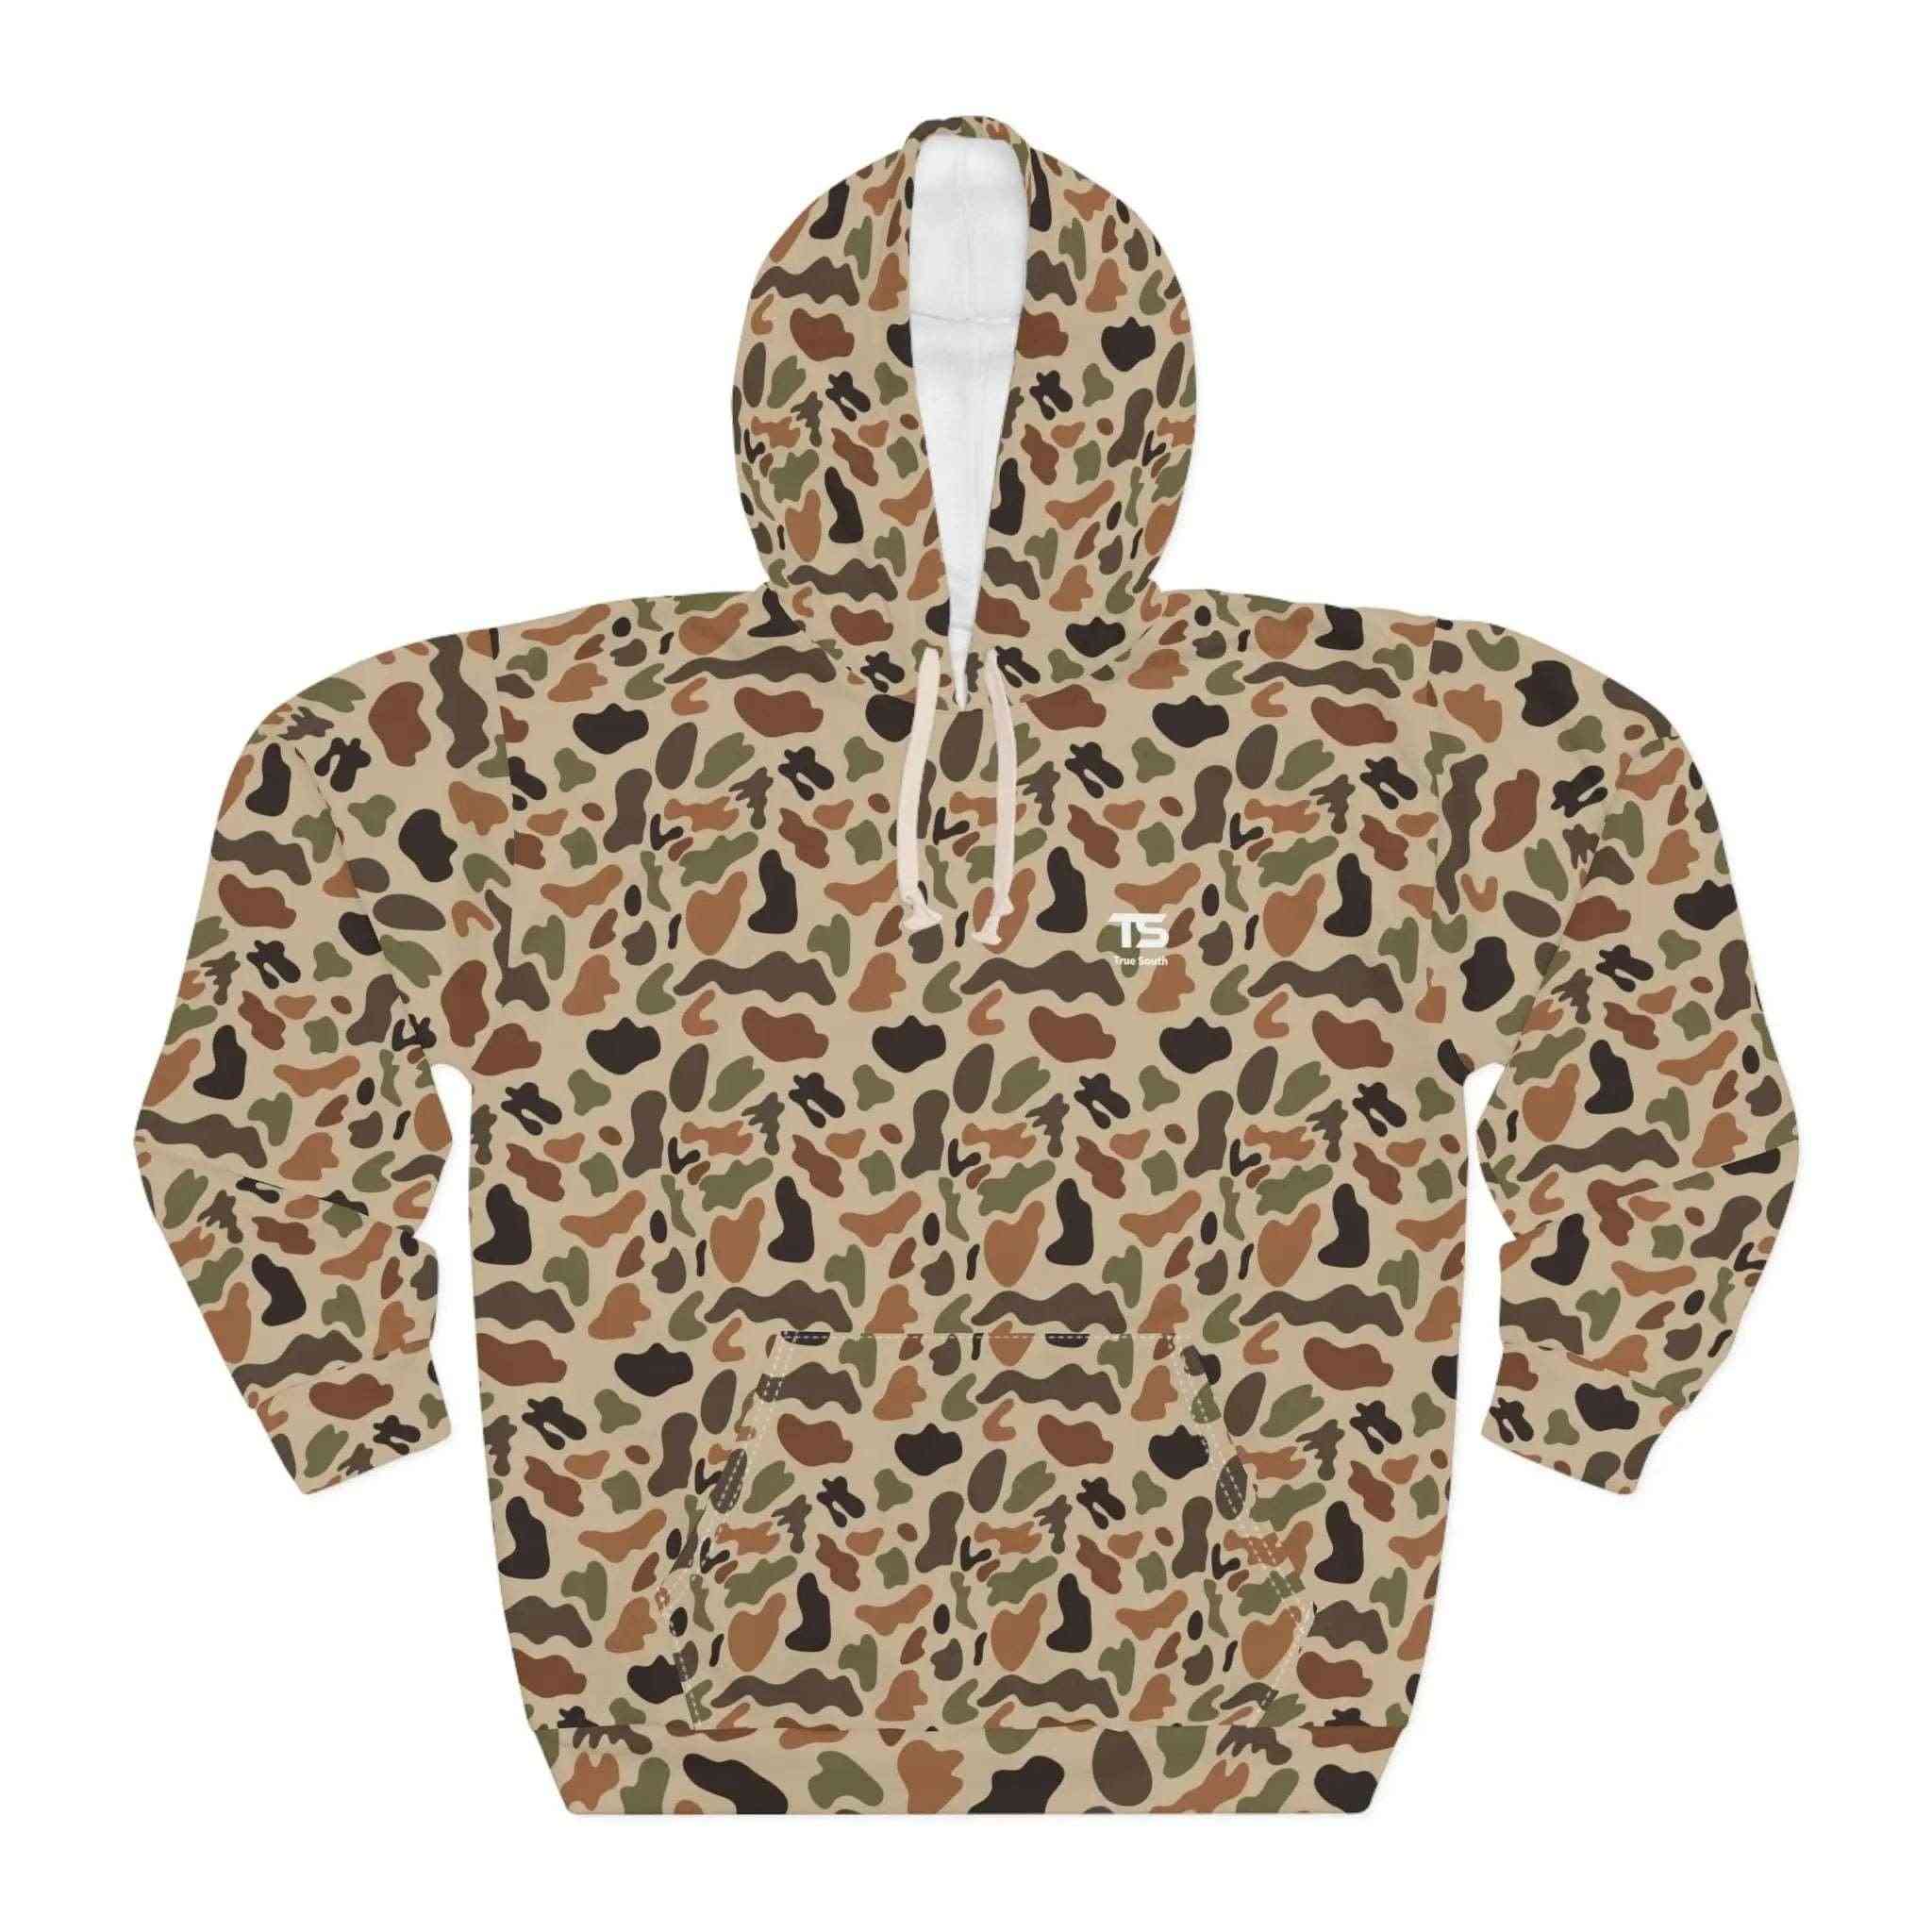 Southern Spotted Camo Hoodie: Blend in with Style and Southern Flair